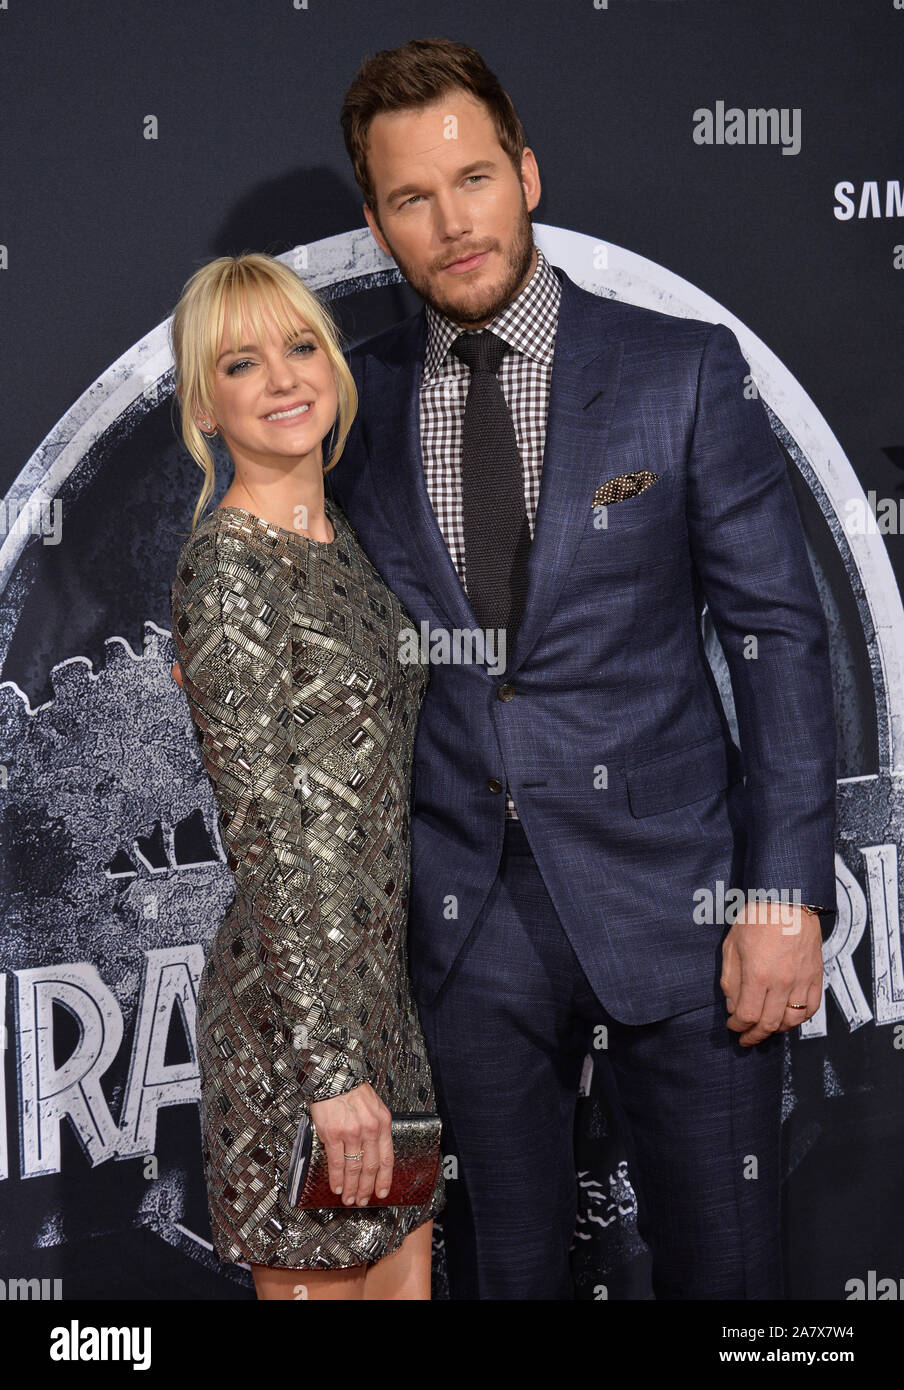 LOS ANGELES, CA - JUNE 10, 2015: Chris Pratt & wife Anna Faris at the world premiere of his movie 'Jurassic World' at the Dolby Theatre, Hollywood. © 2015 Paul Smith / Featureflash Stock Photo